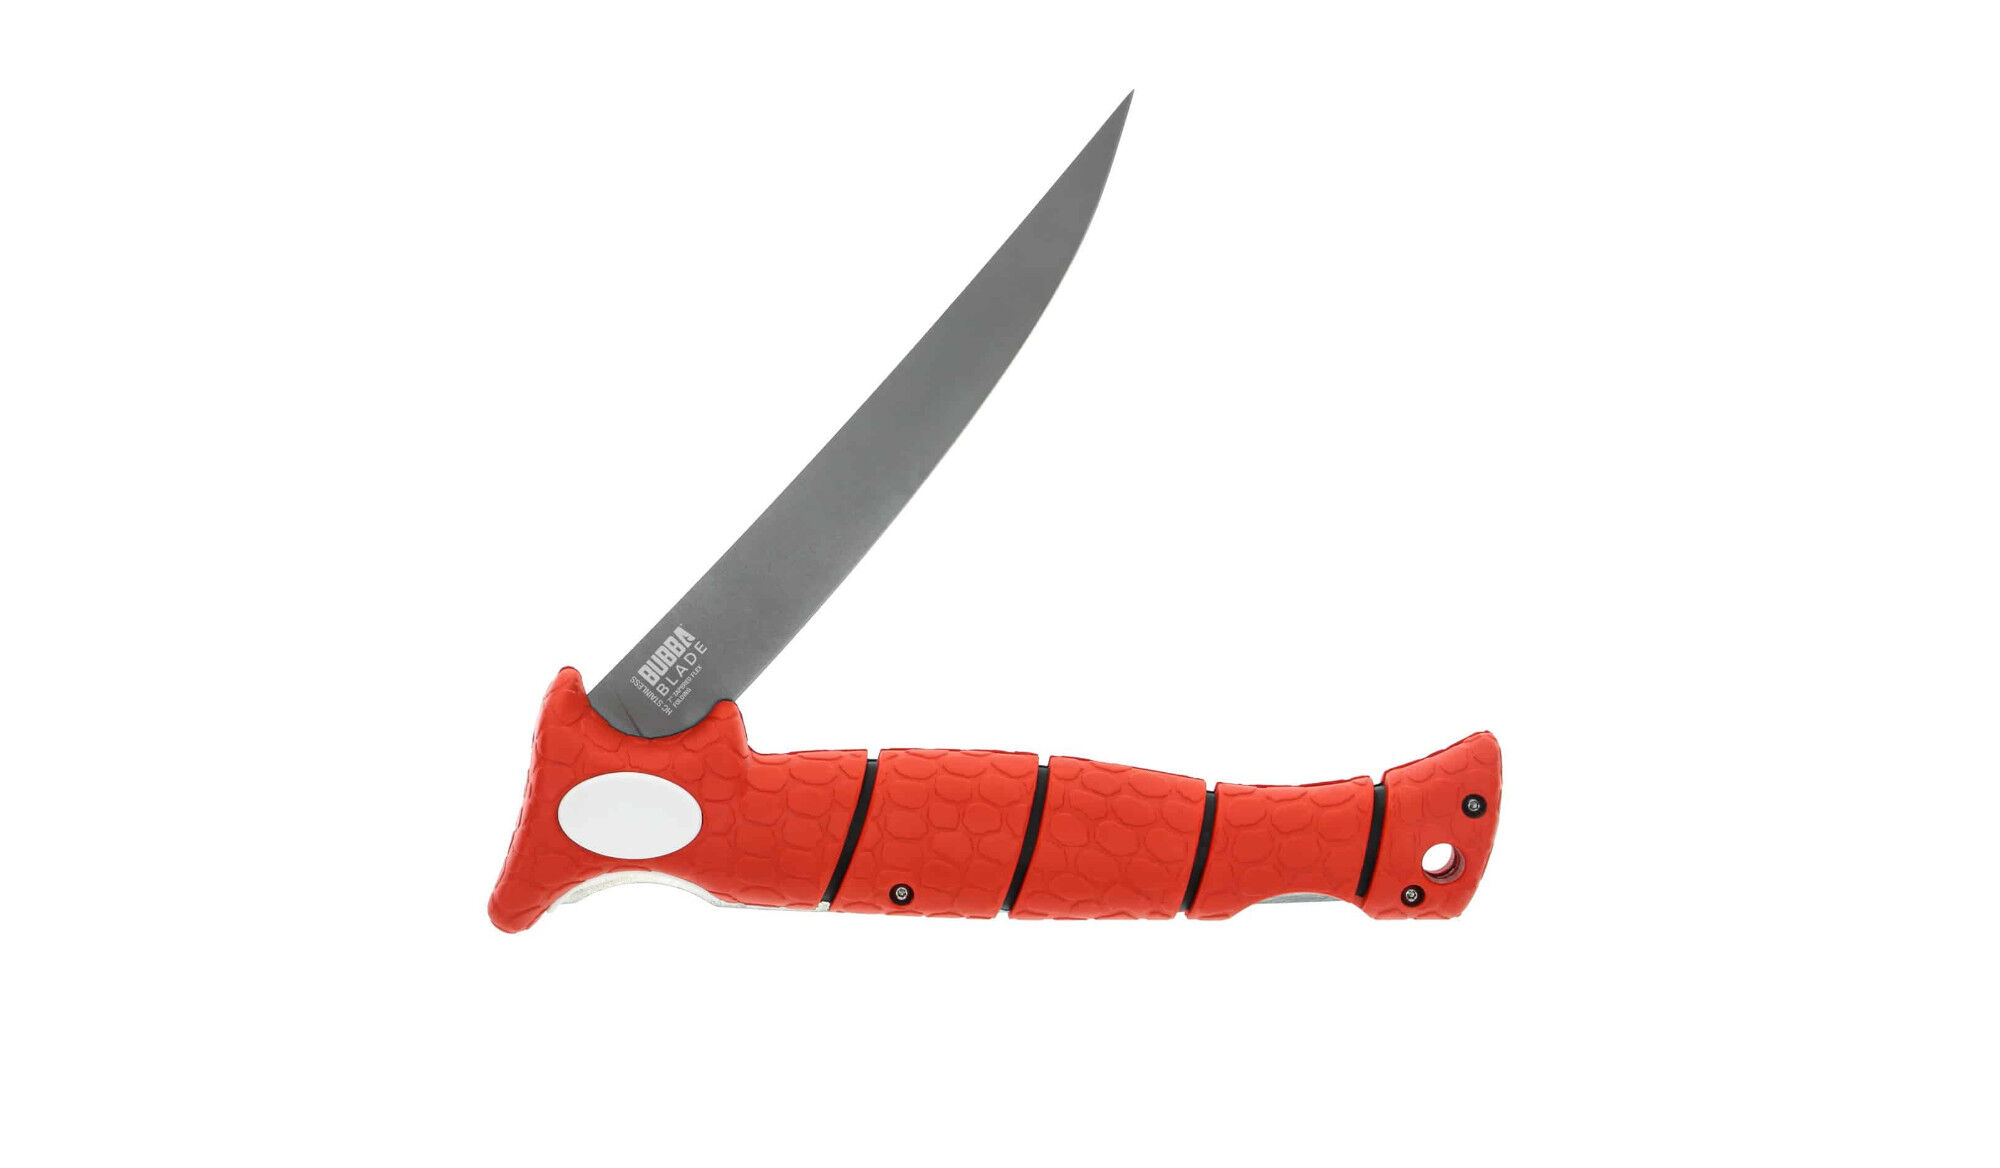 Foldable Pocket Knife Box Cutter With Blades included Premium